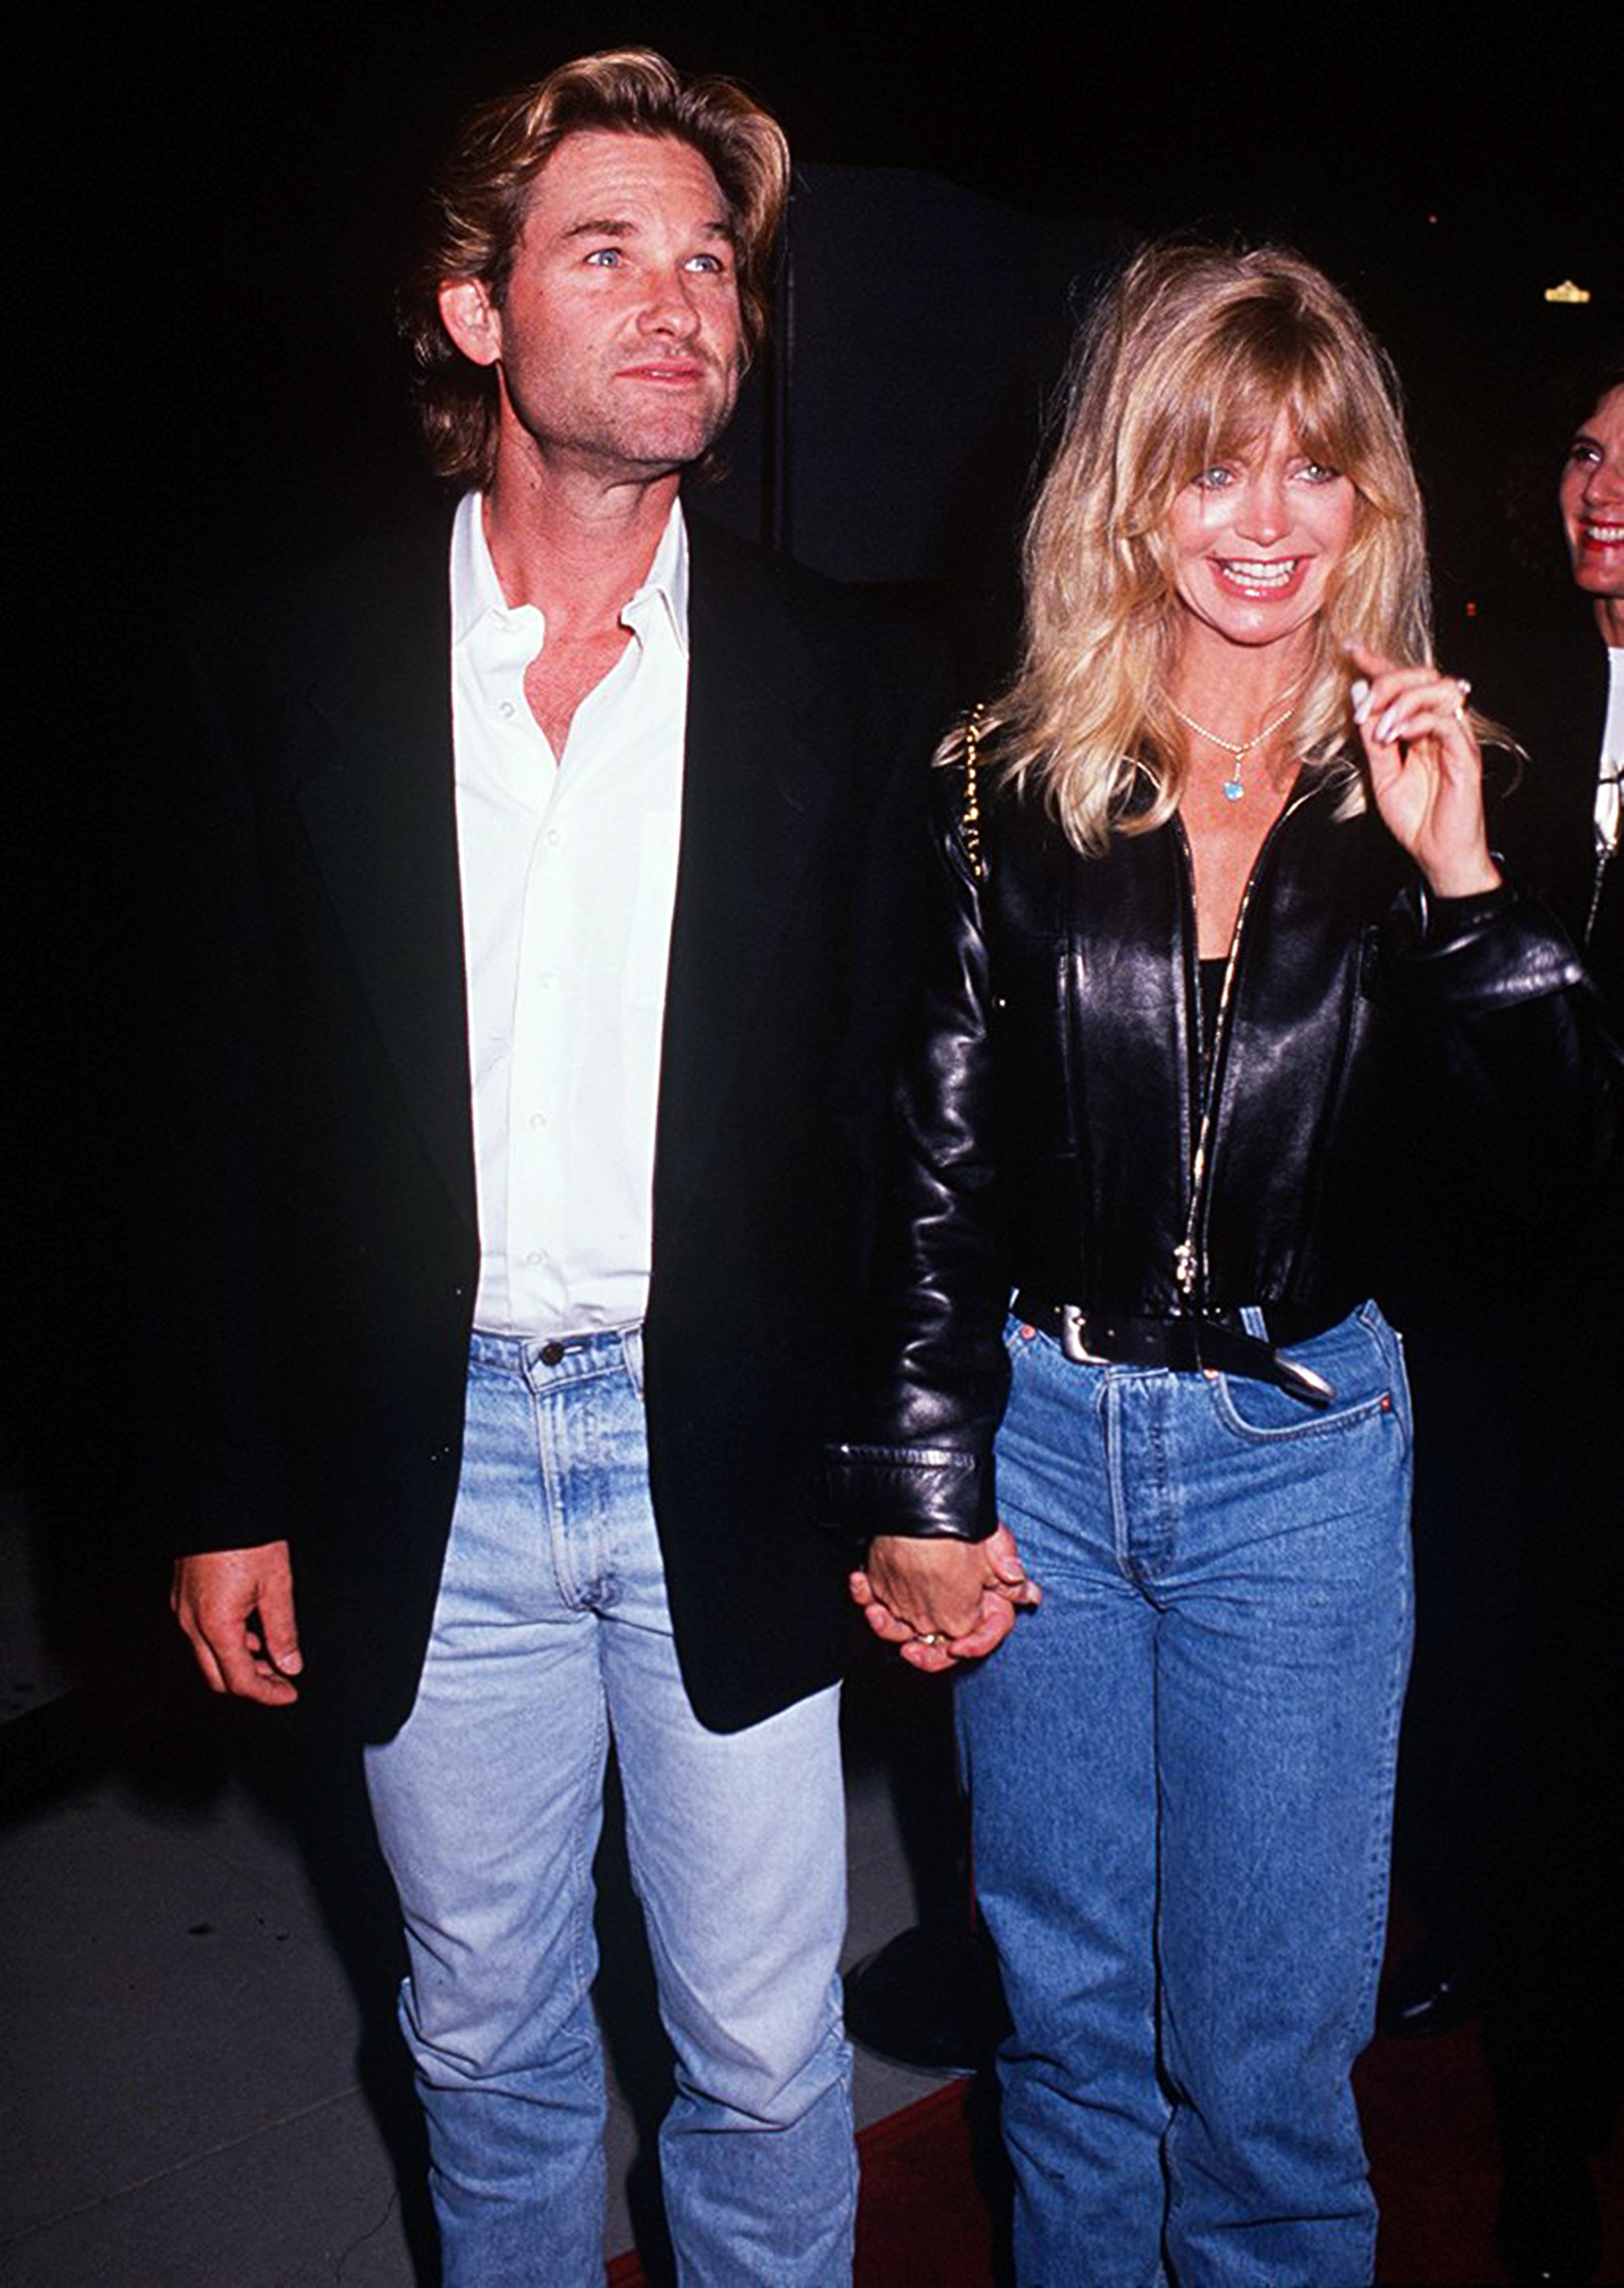 Kurt Russell and Goldie Hawn attend the premiere of "Housesitter" in Beverly Hills, California on June 9, 1992 | Photo: Getty Images